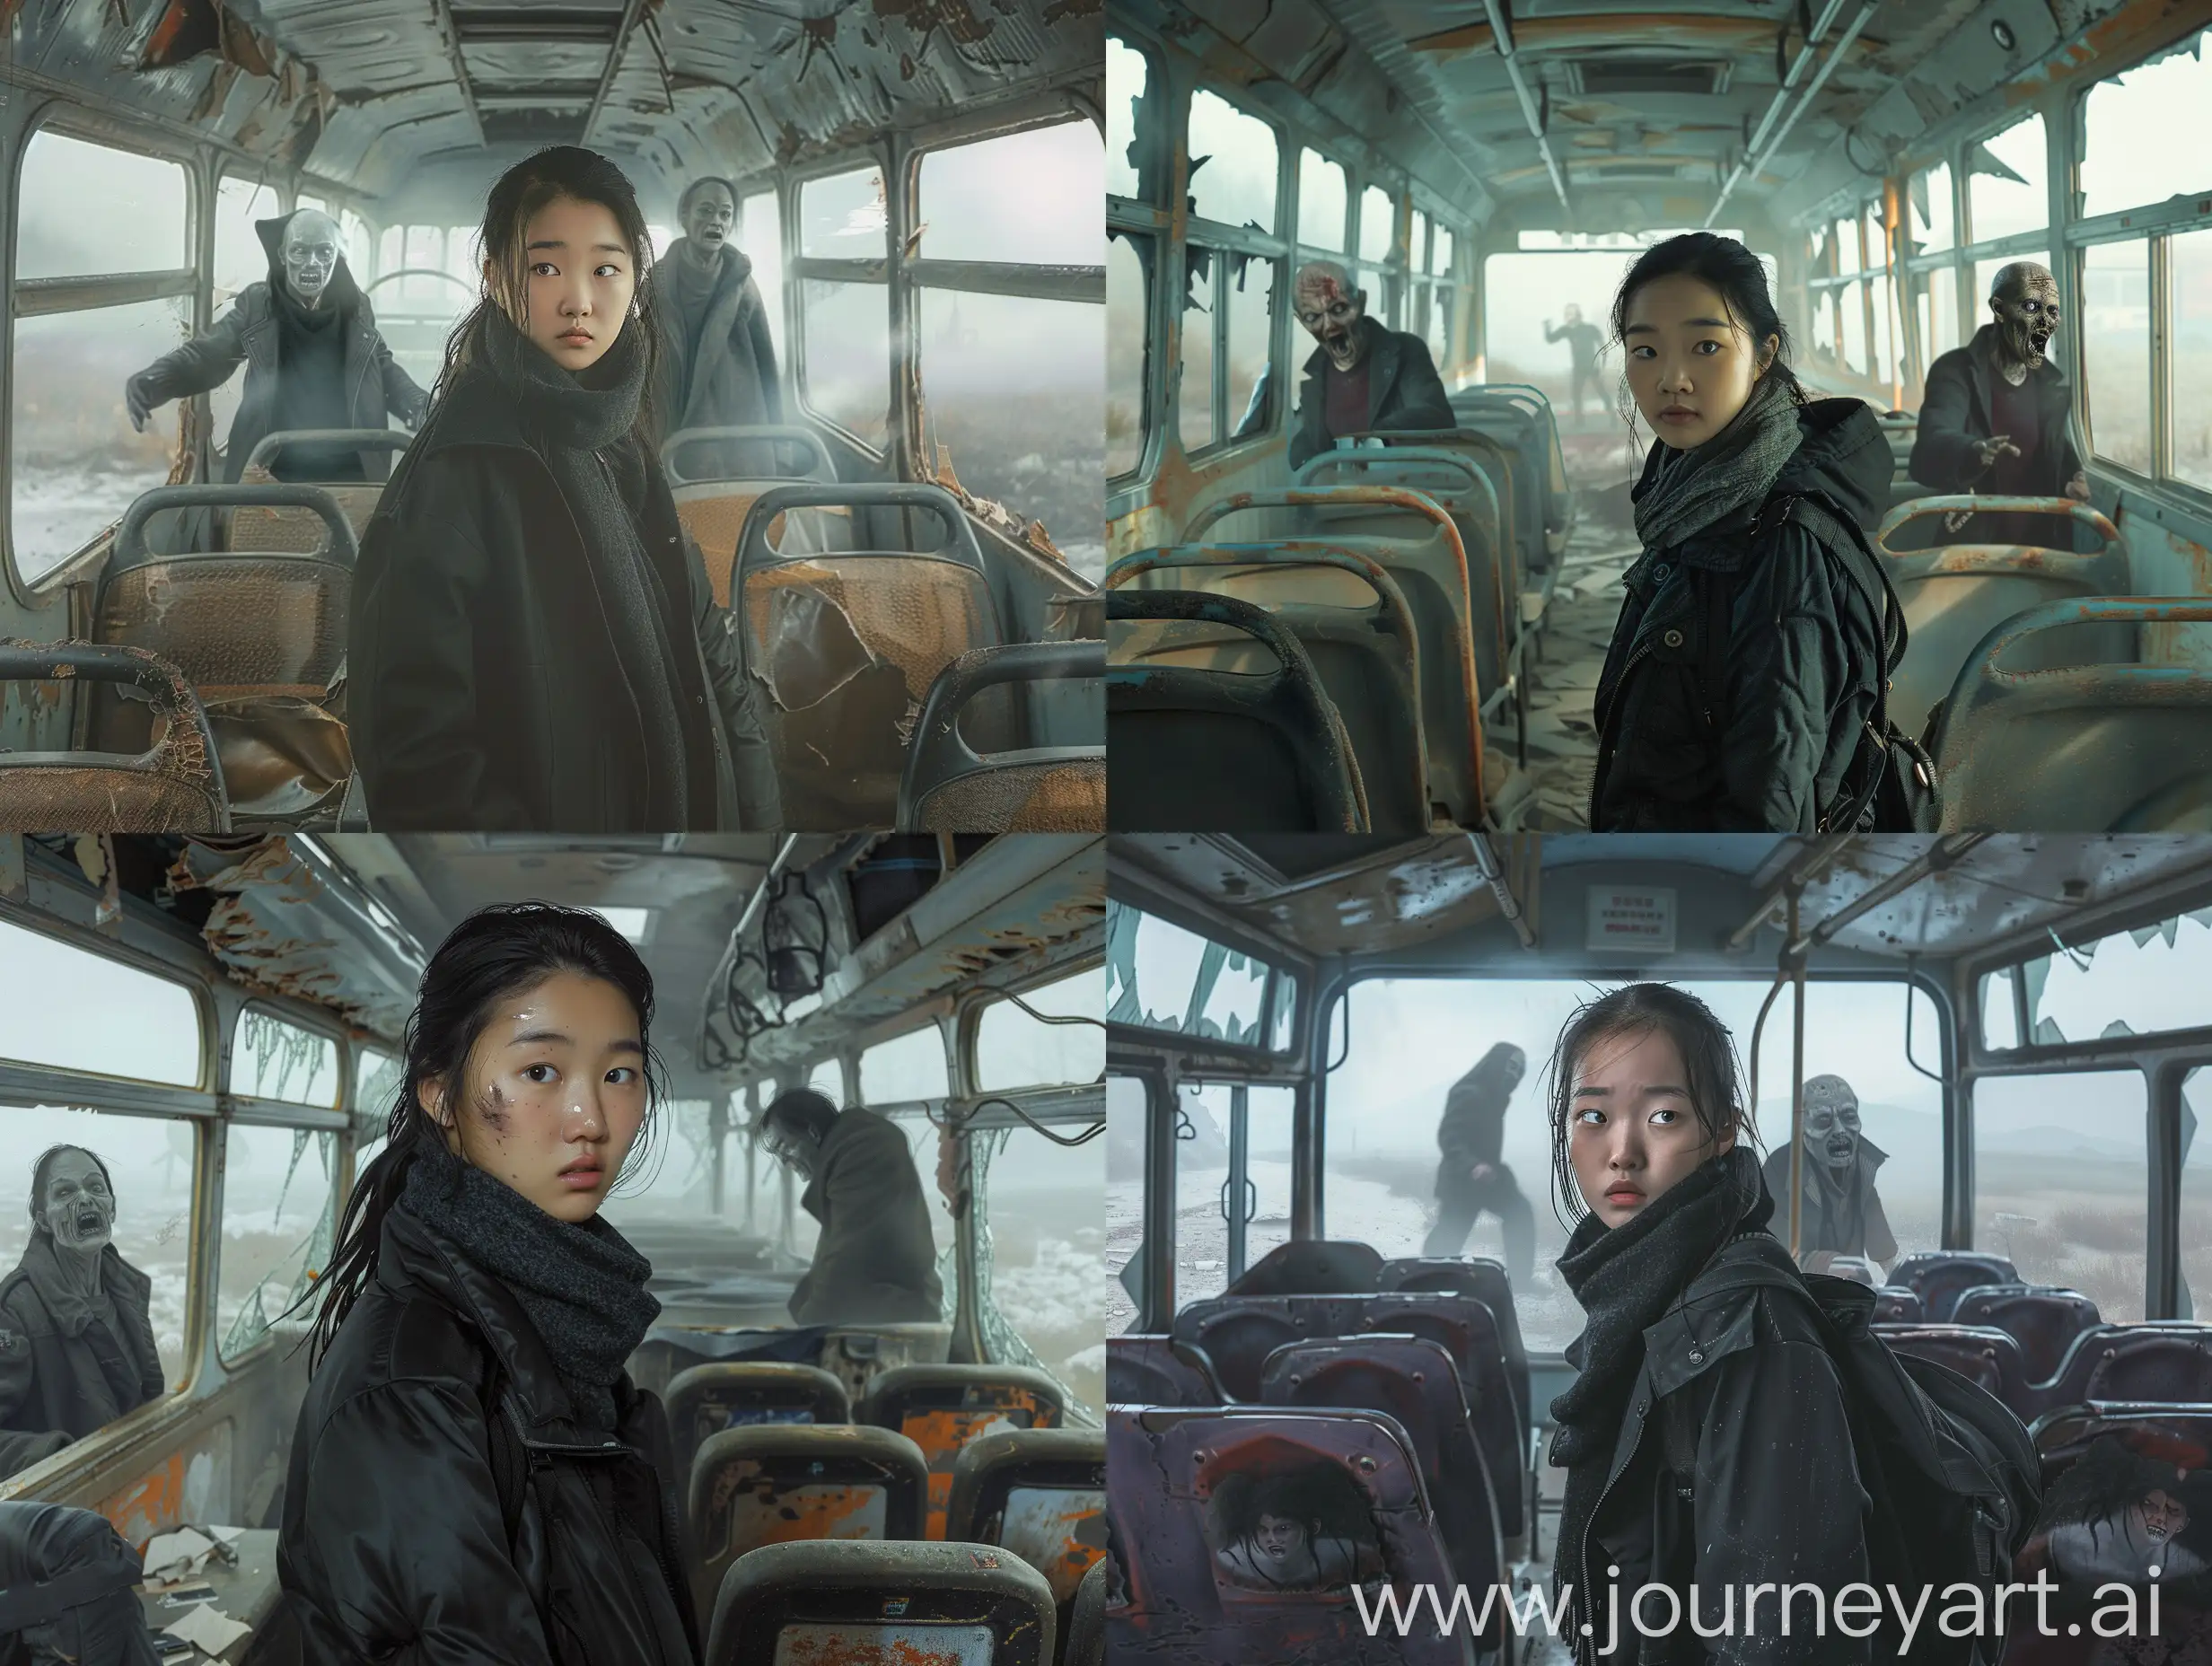 realistic, cinematic, inside a dilapidated bus. a young aisa woman with a determined, yet anxious expression, wearing a black jacket and scarf, standing amid wrecked seats. The background features a foggy, desolate landscape, with two zombie-like figures approaching through the rear bus door. The bus’s interior is decrepit, with cracked windows, peeling paint, and tattered seats, emphasizing a post-apocalyptic setting. The color palette is muted and cold, enhancing the sense of desolation and urgency, in a cinematic scene with real-life and very clear details. 
